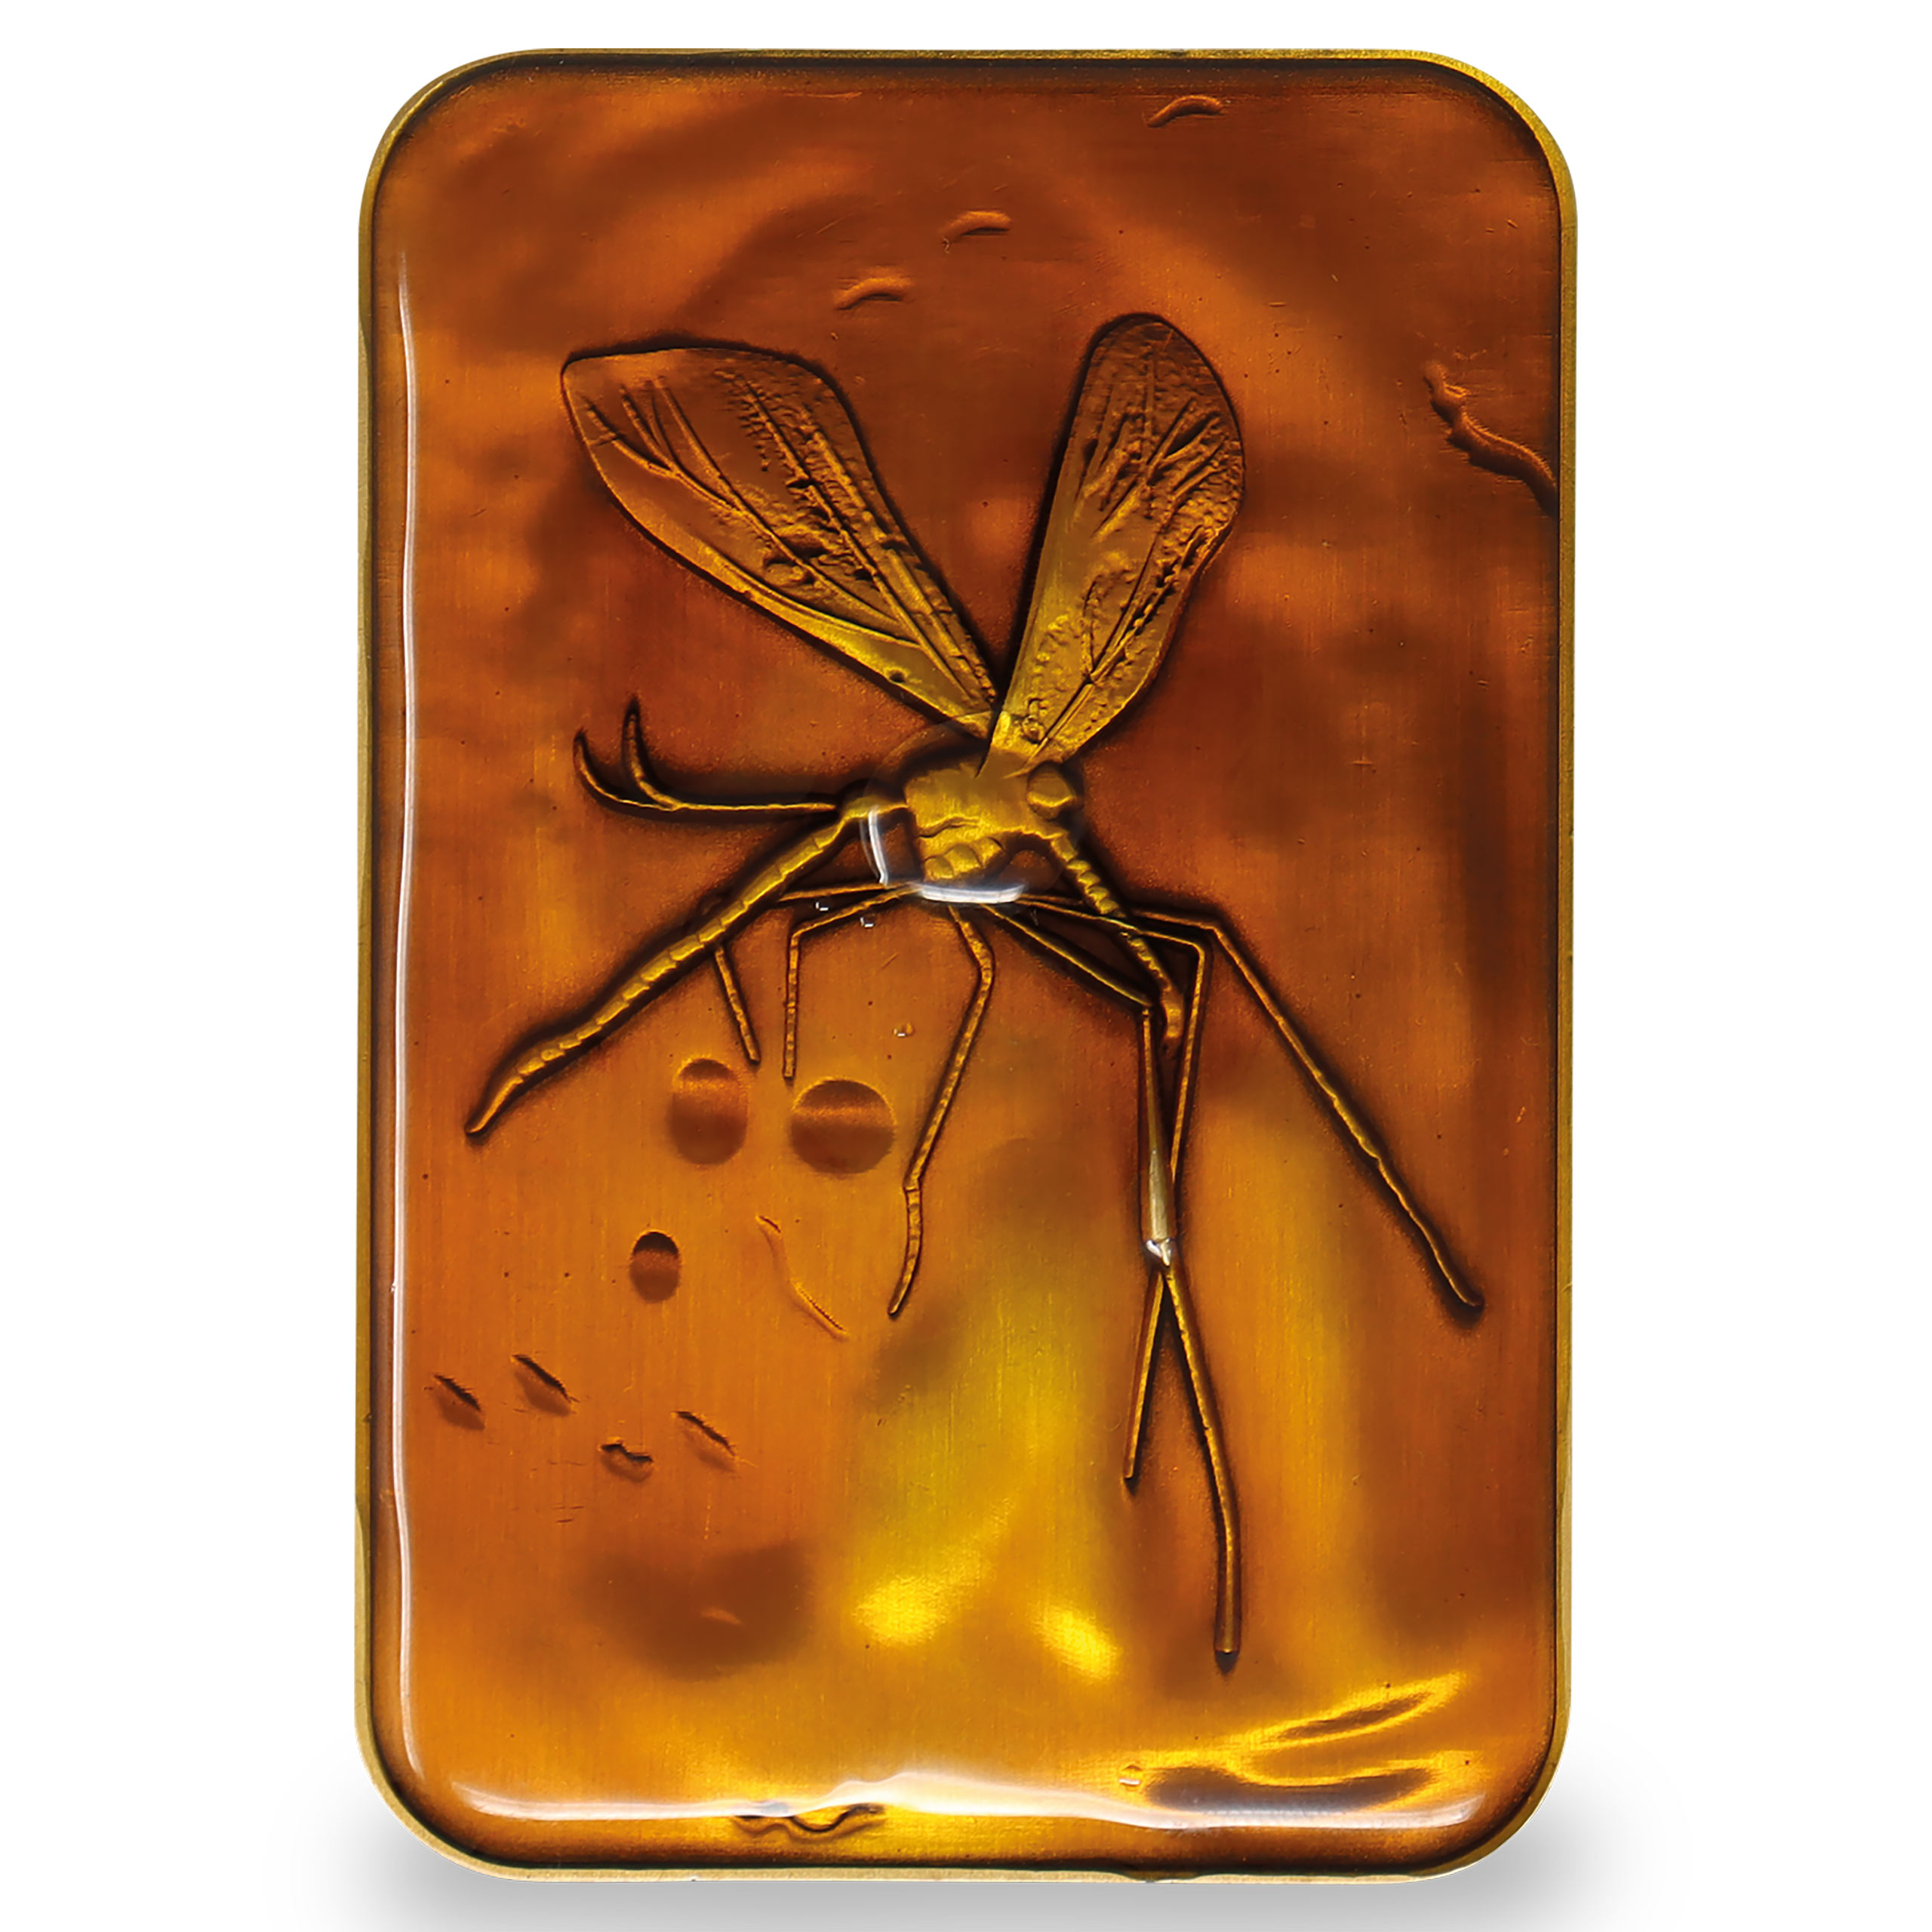 Jurassic Park - Mosquito in Amber Metal Bar Replica Limited